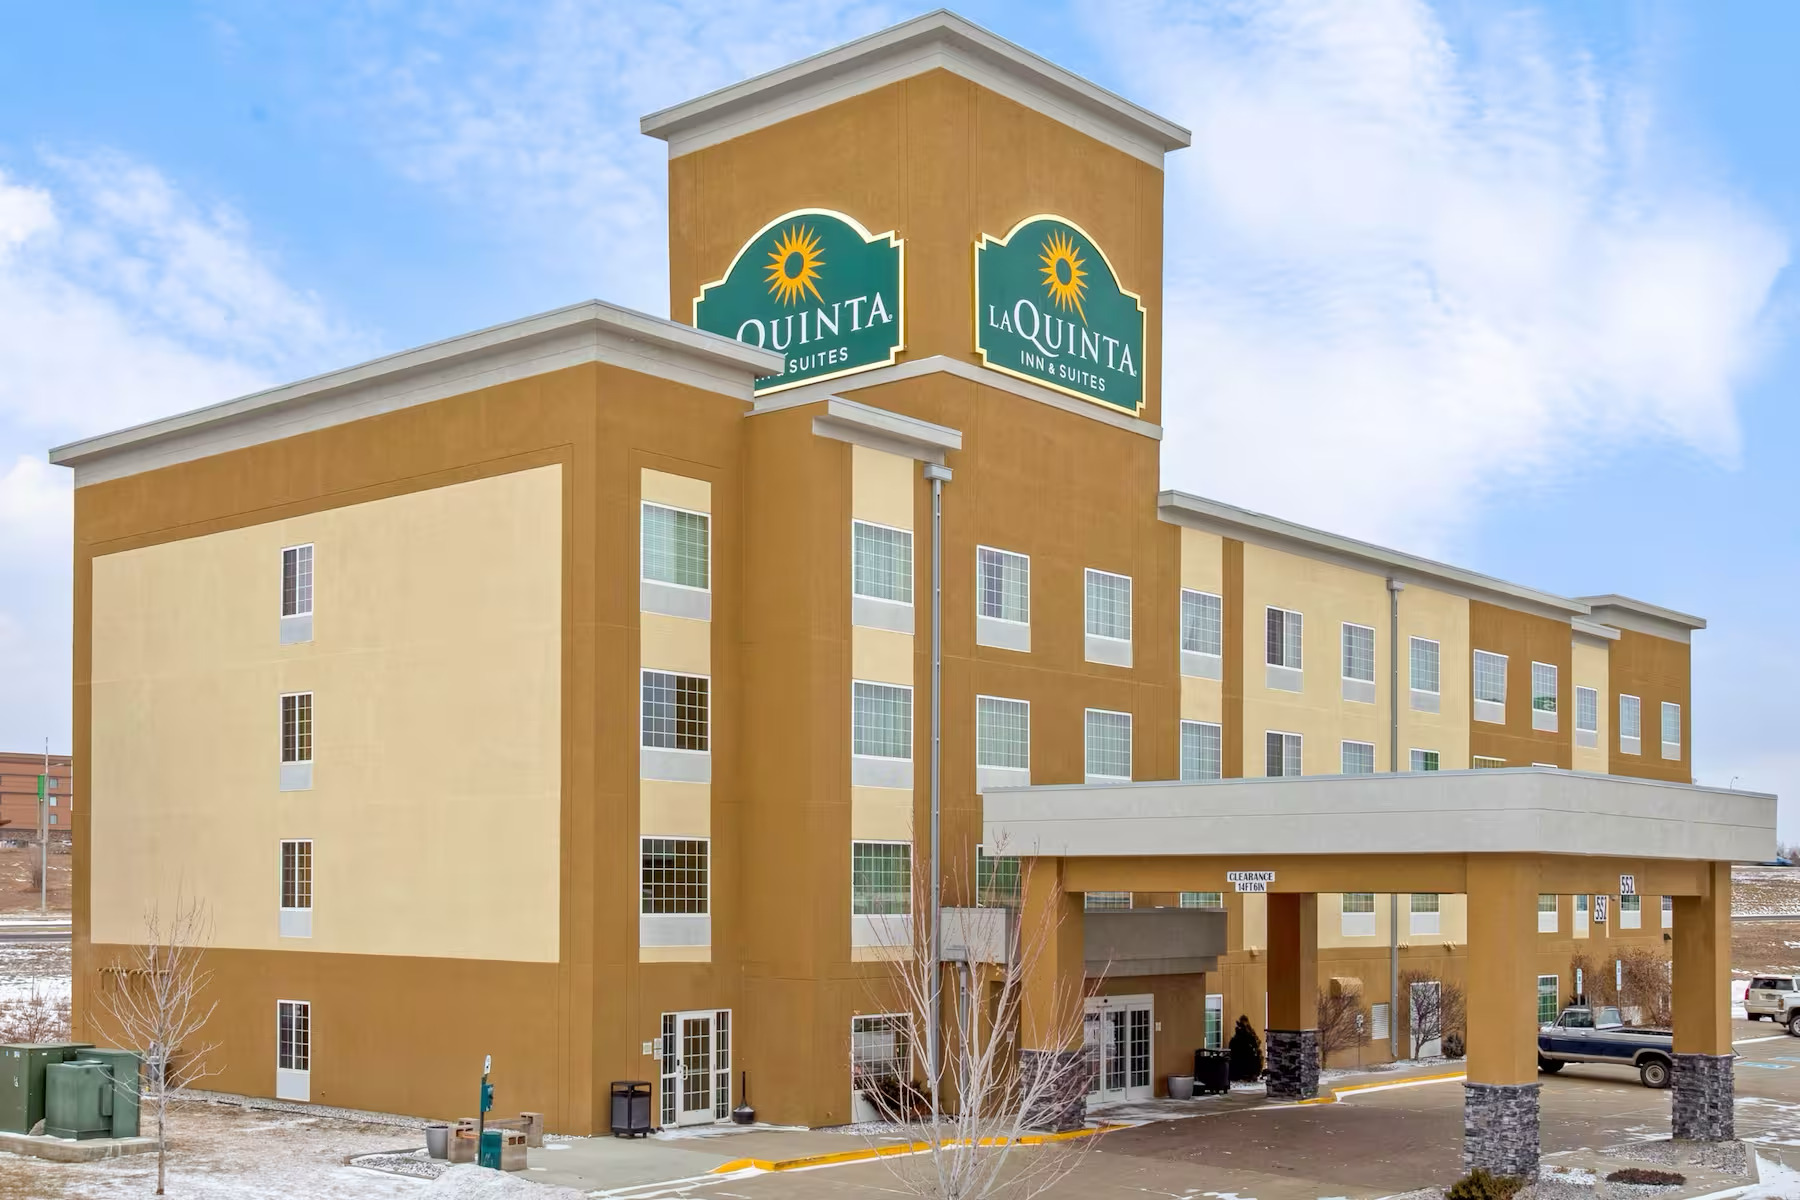 Photo of La Quinta Inn and Suites Dickinson, Dickinson, ND